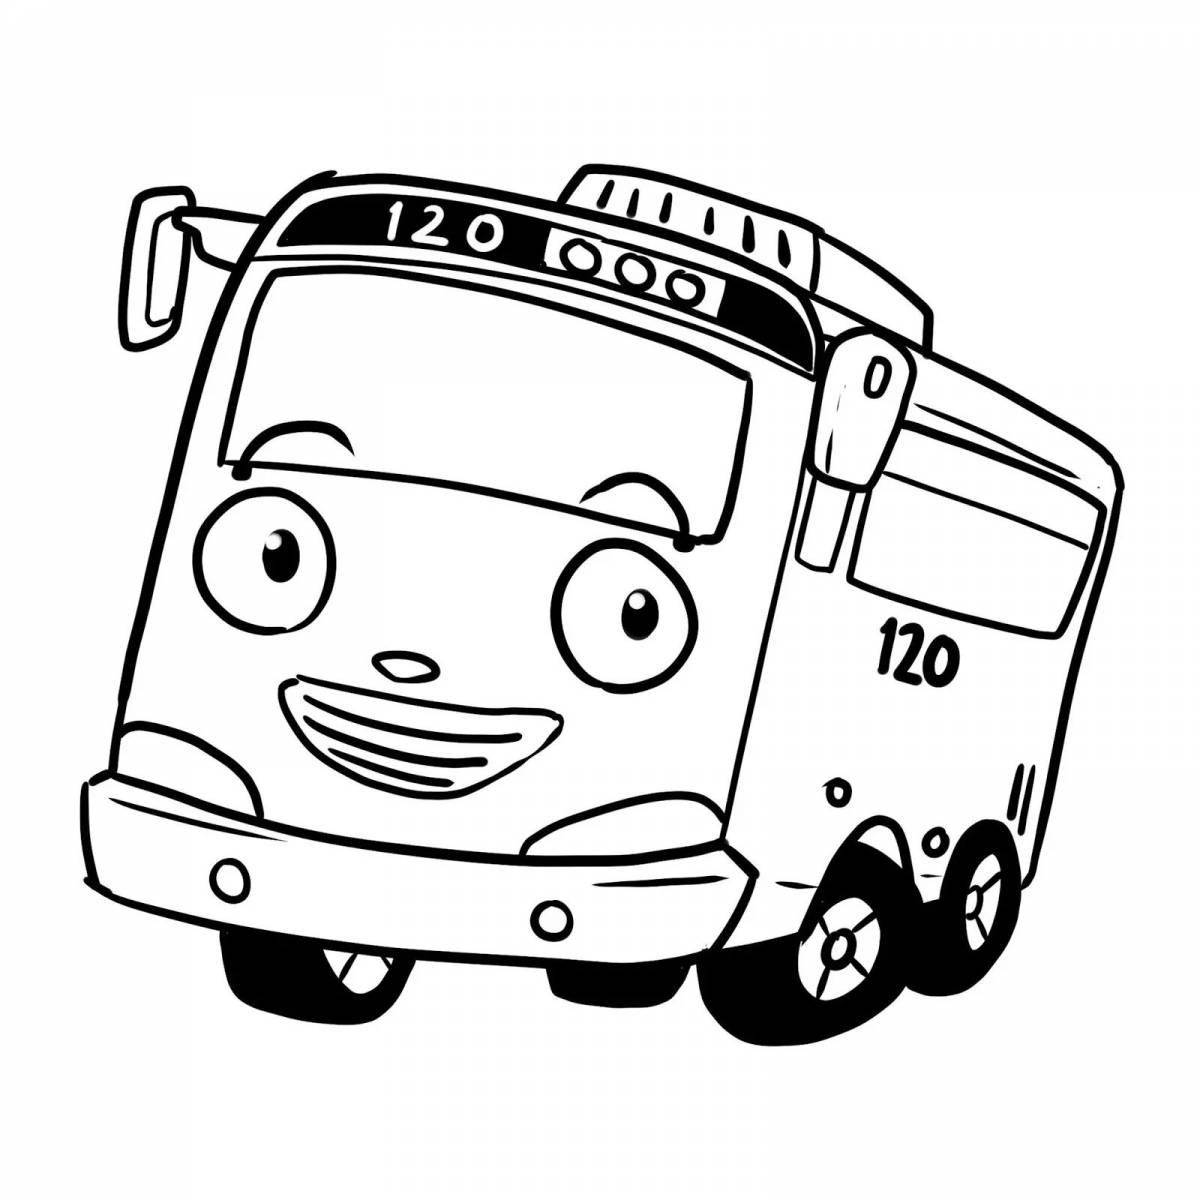 English bus coloring page with colored splashes